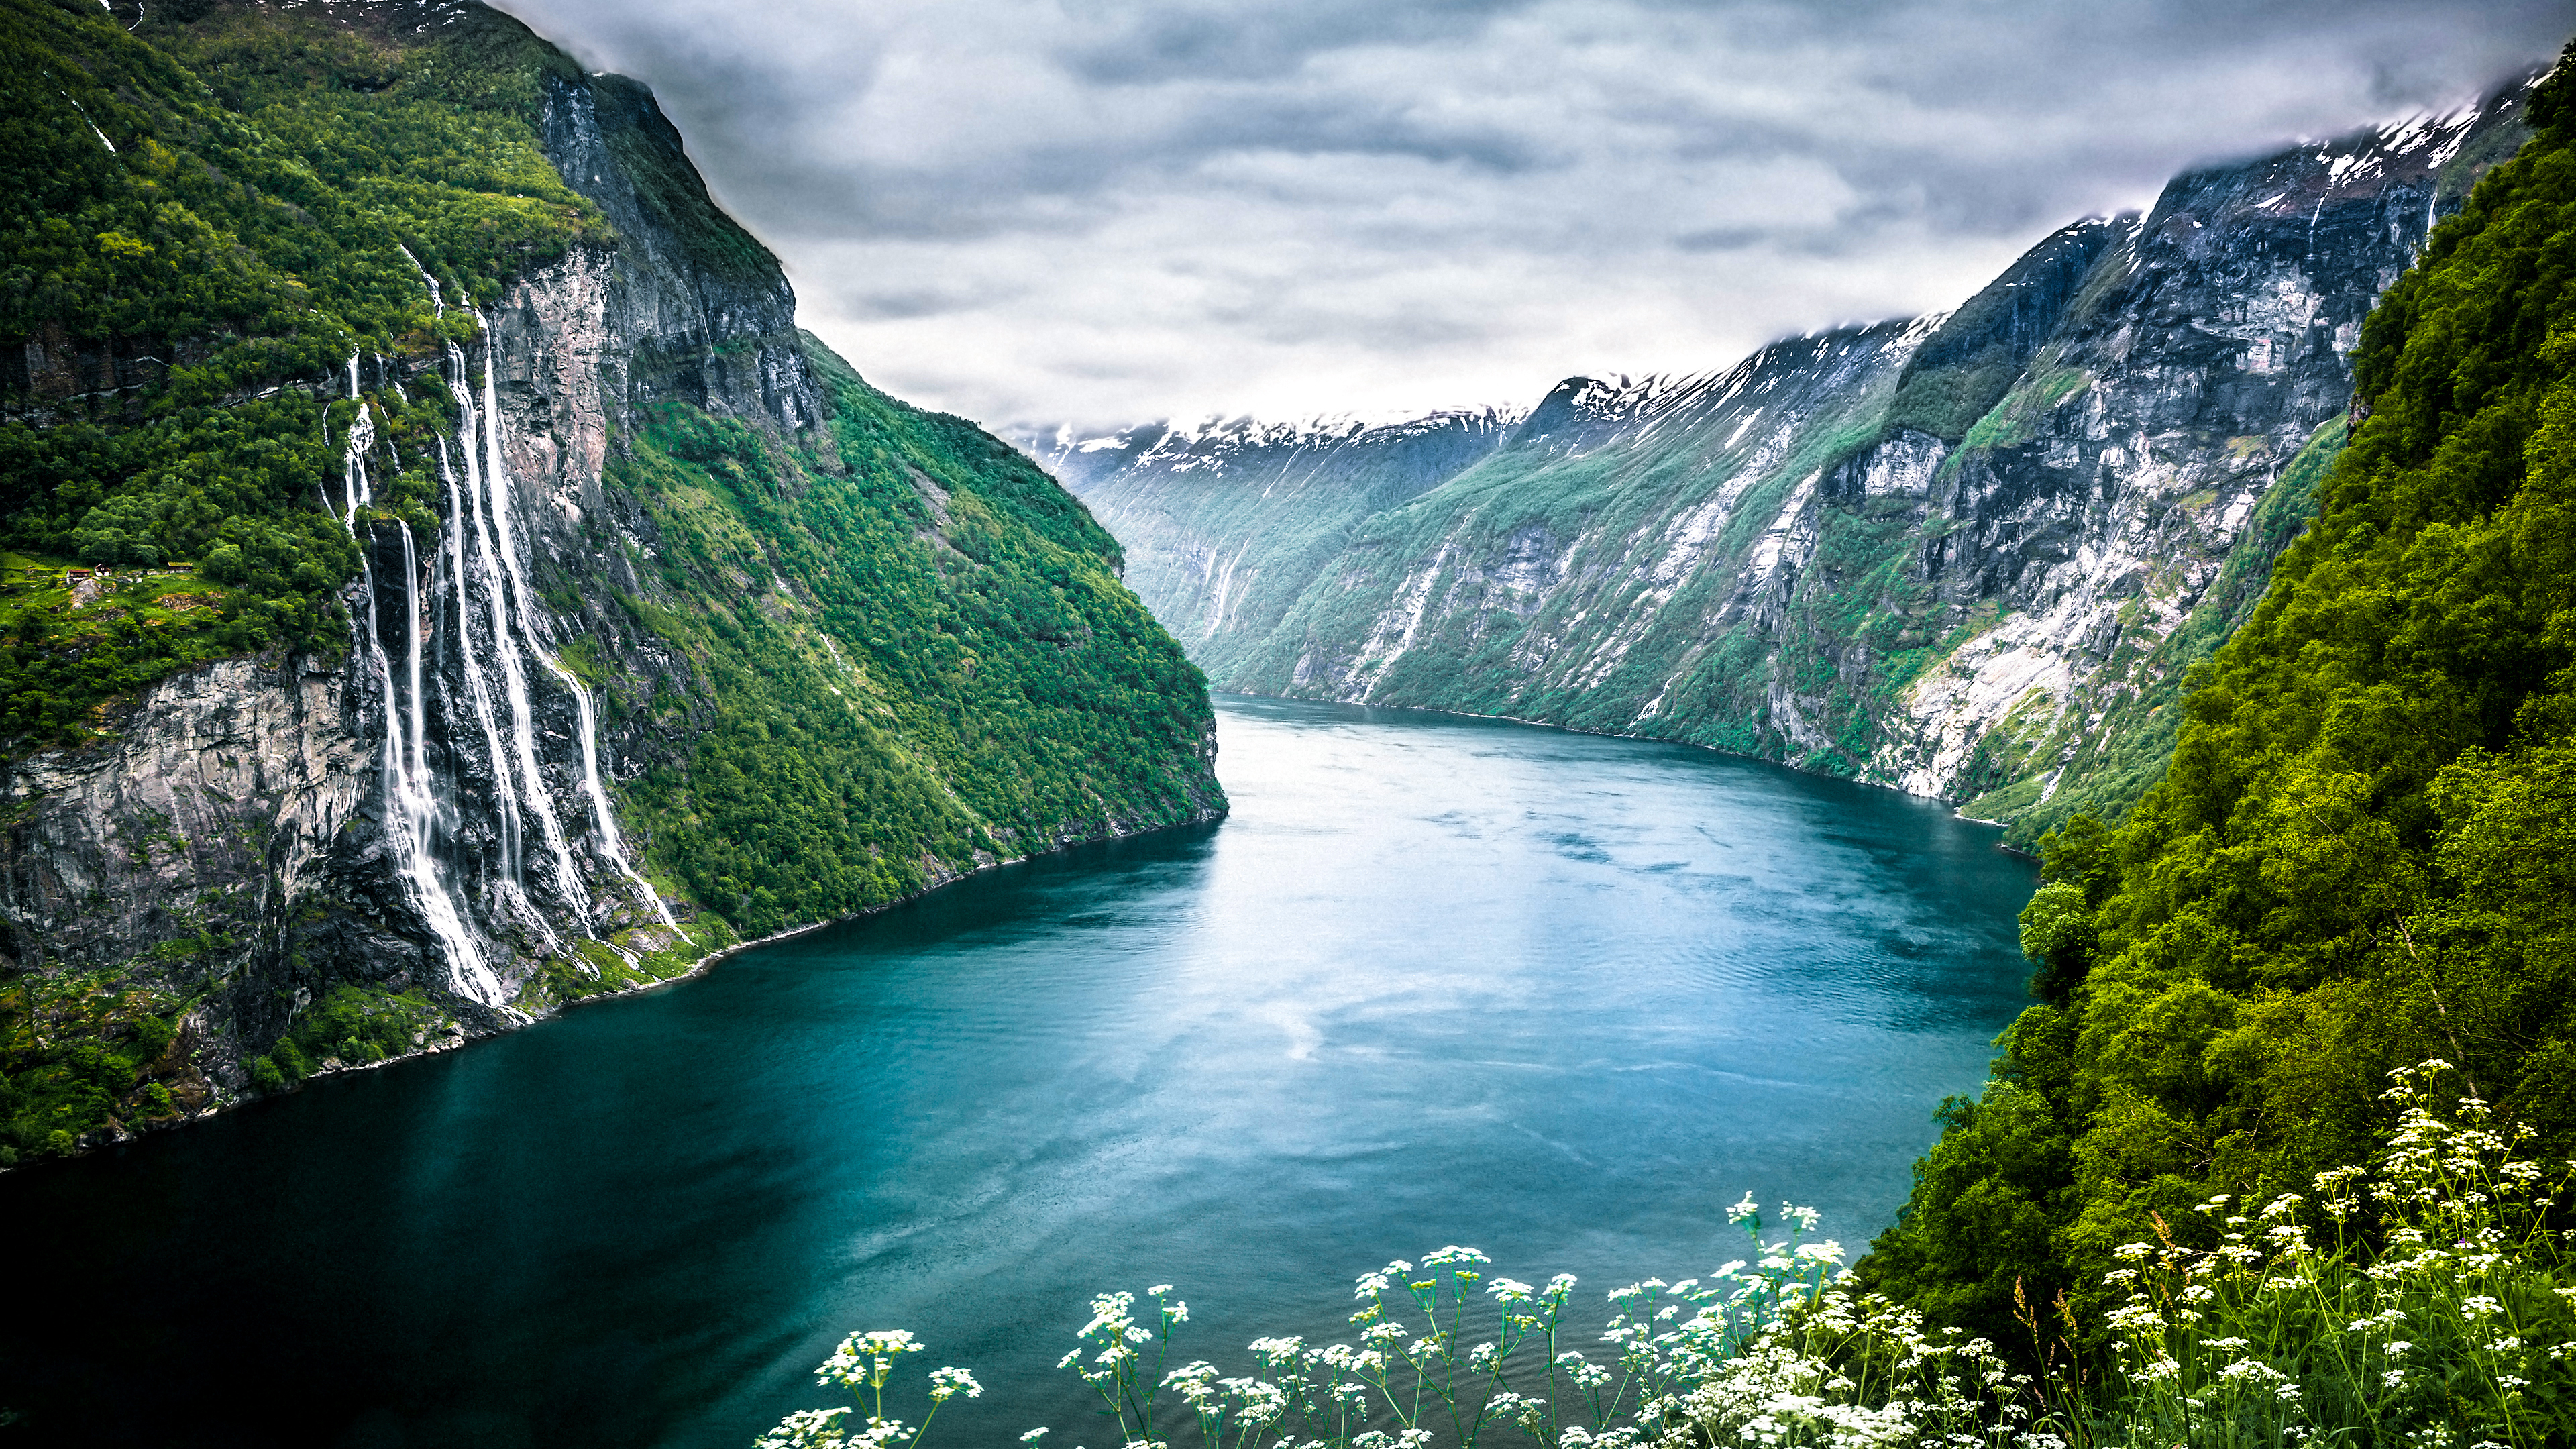 A cool view of a fjord